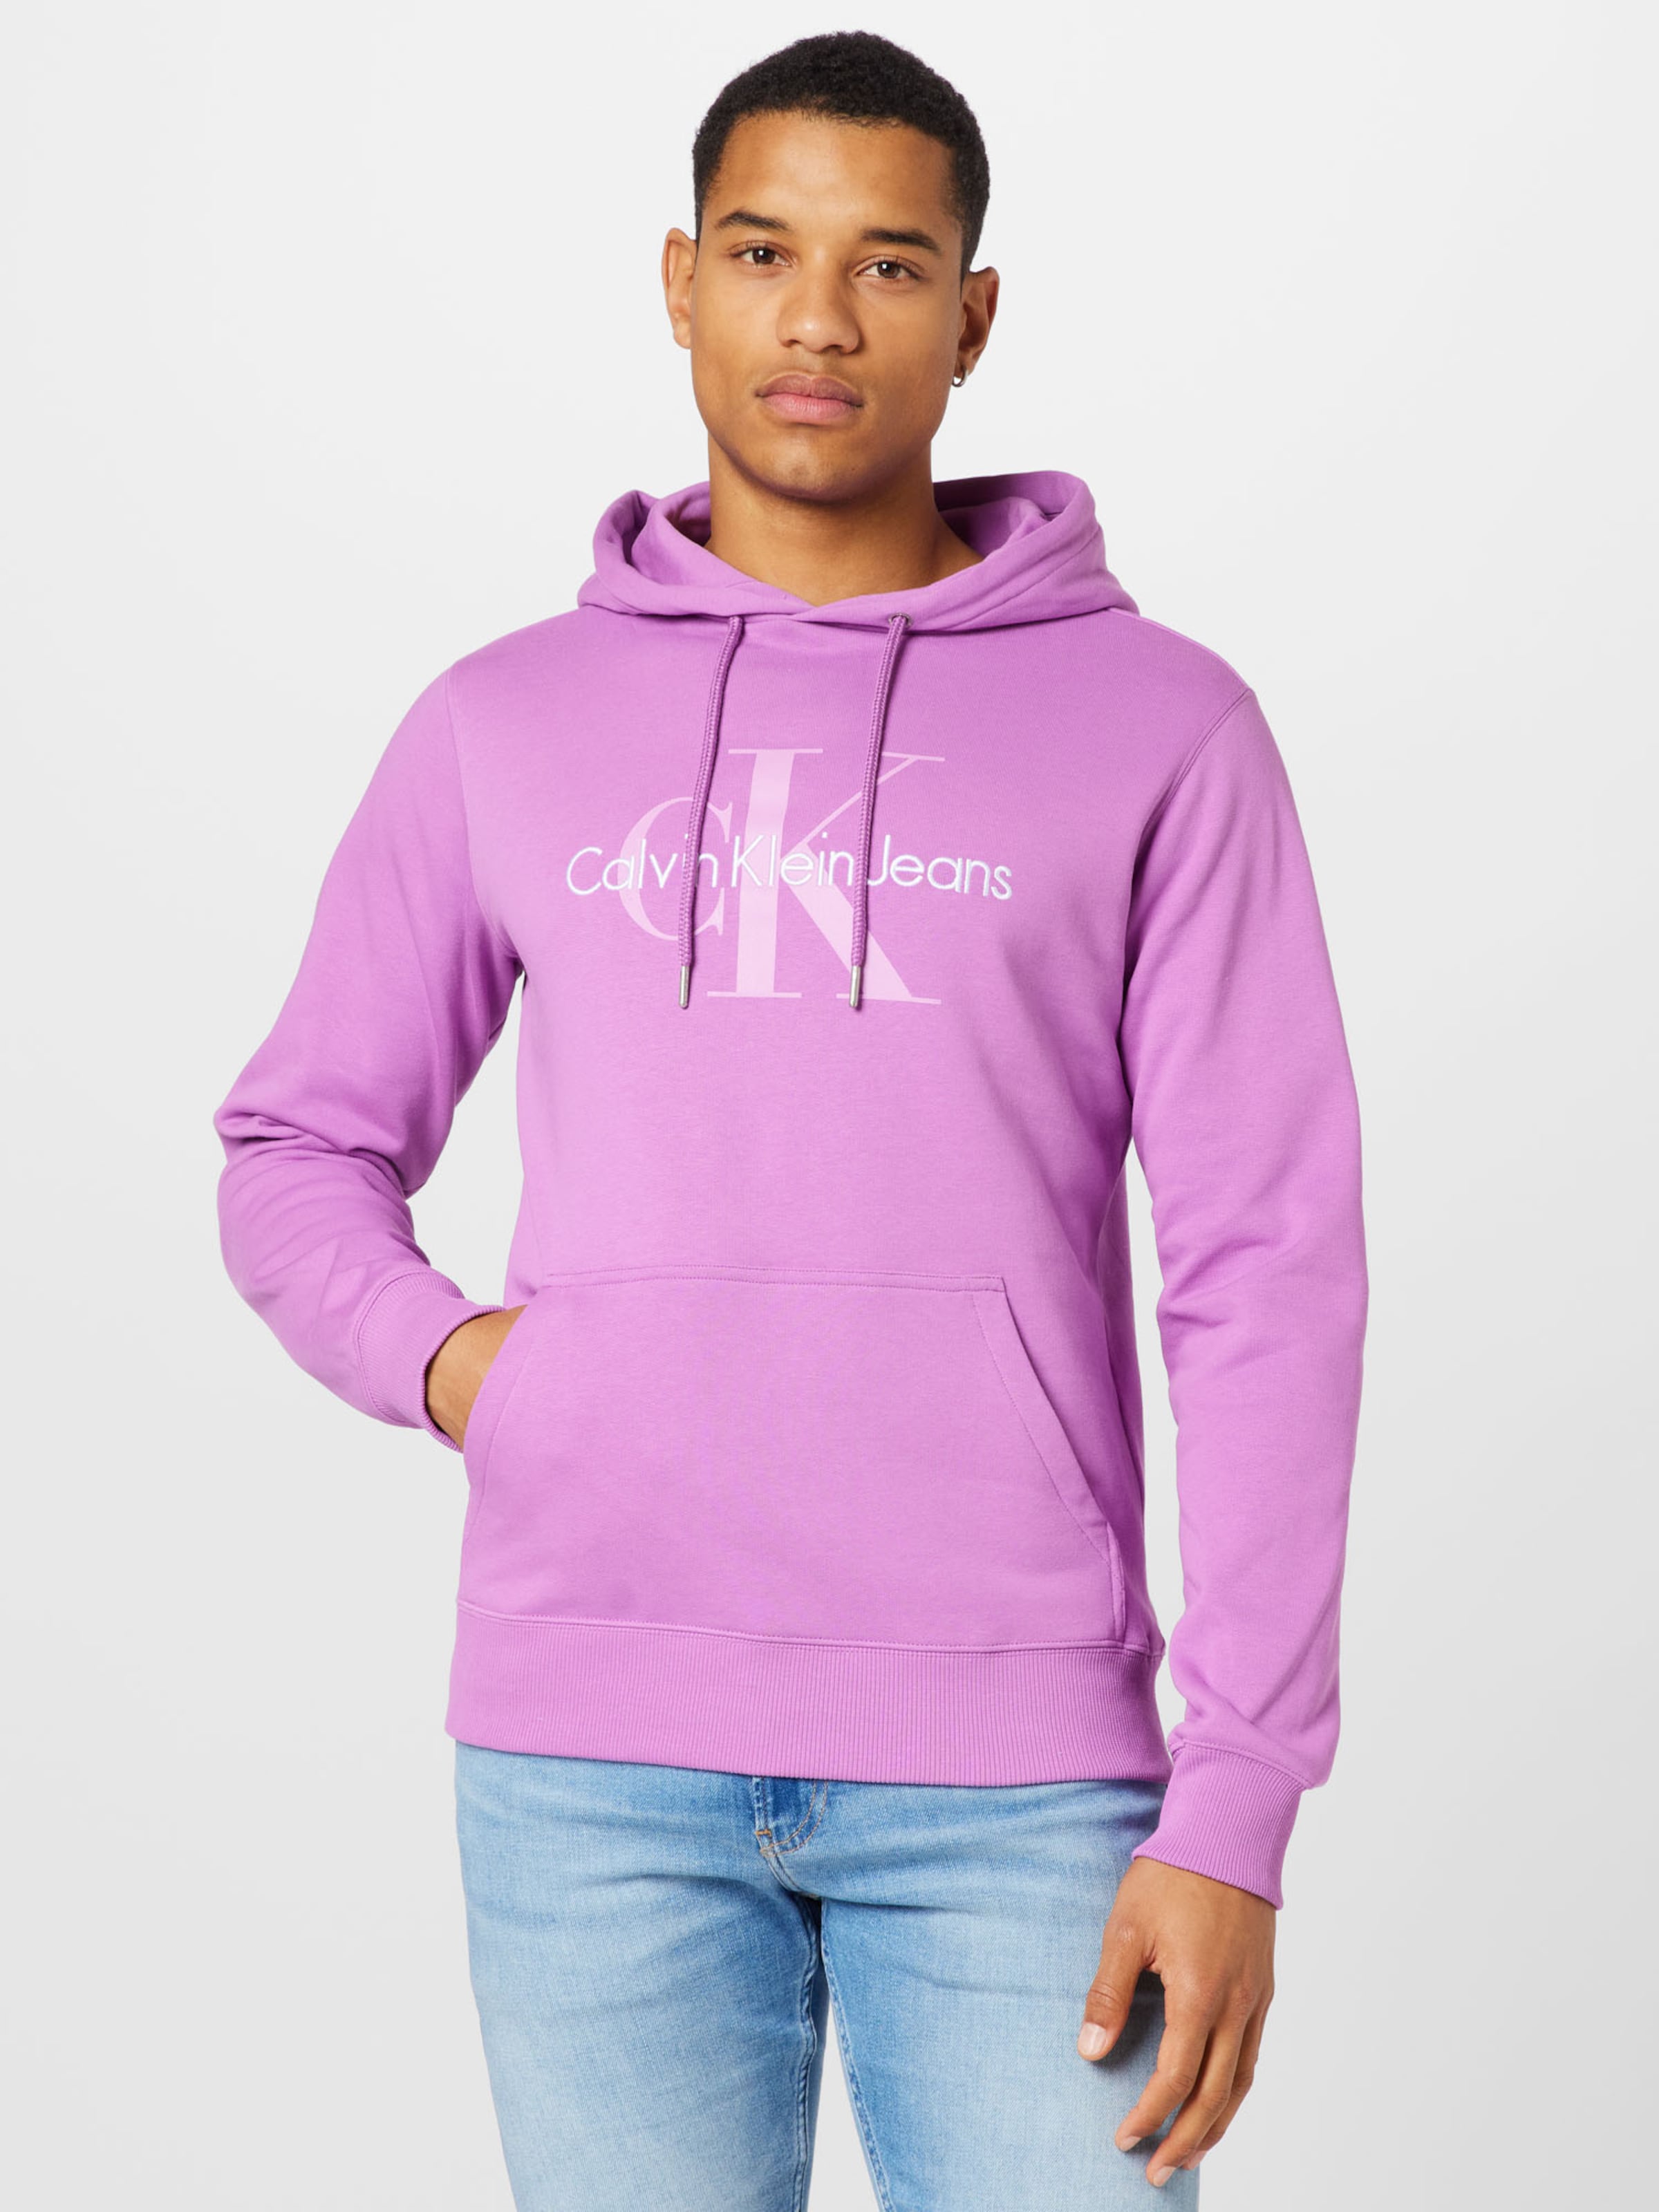 Calvin Klein Jeans Sweatshirt in Lilac, Orchid | ABOUT YOU